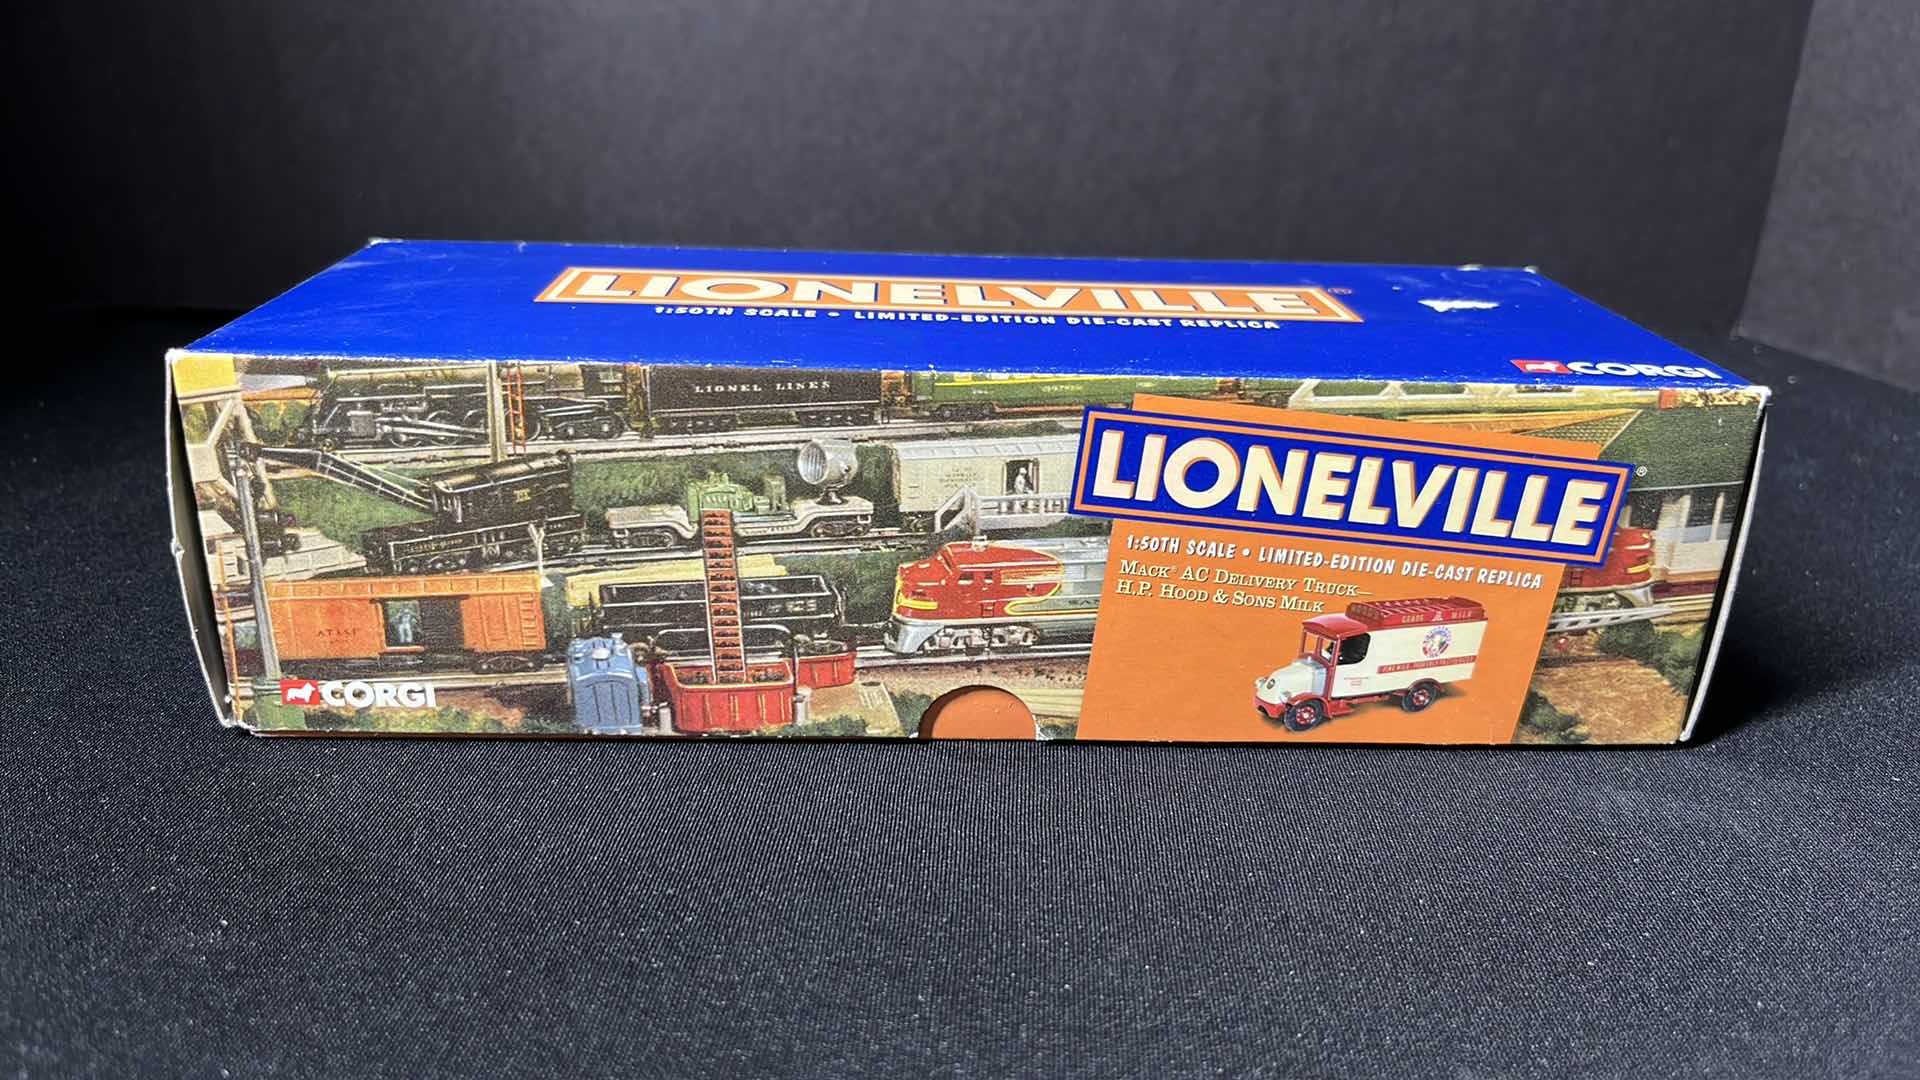 Photo 2 of CORGI CLASSICS INC, LIONELVILLE LIMITED EDITION DIE-CAST REPLICA MACK AC DELIVERY TRUCK H.P. HOOD & SONS MILK US50602
$50